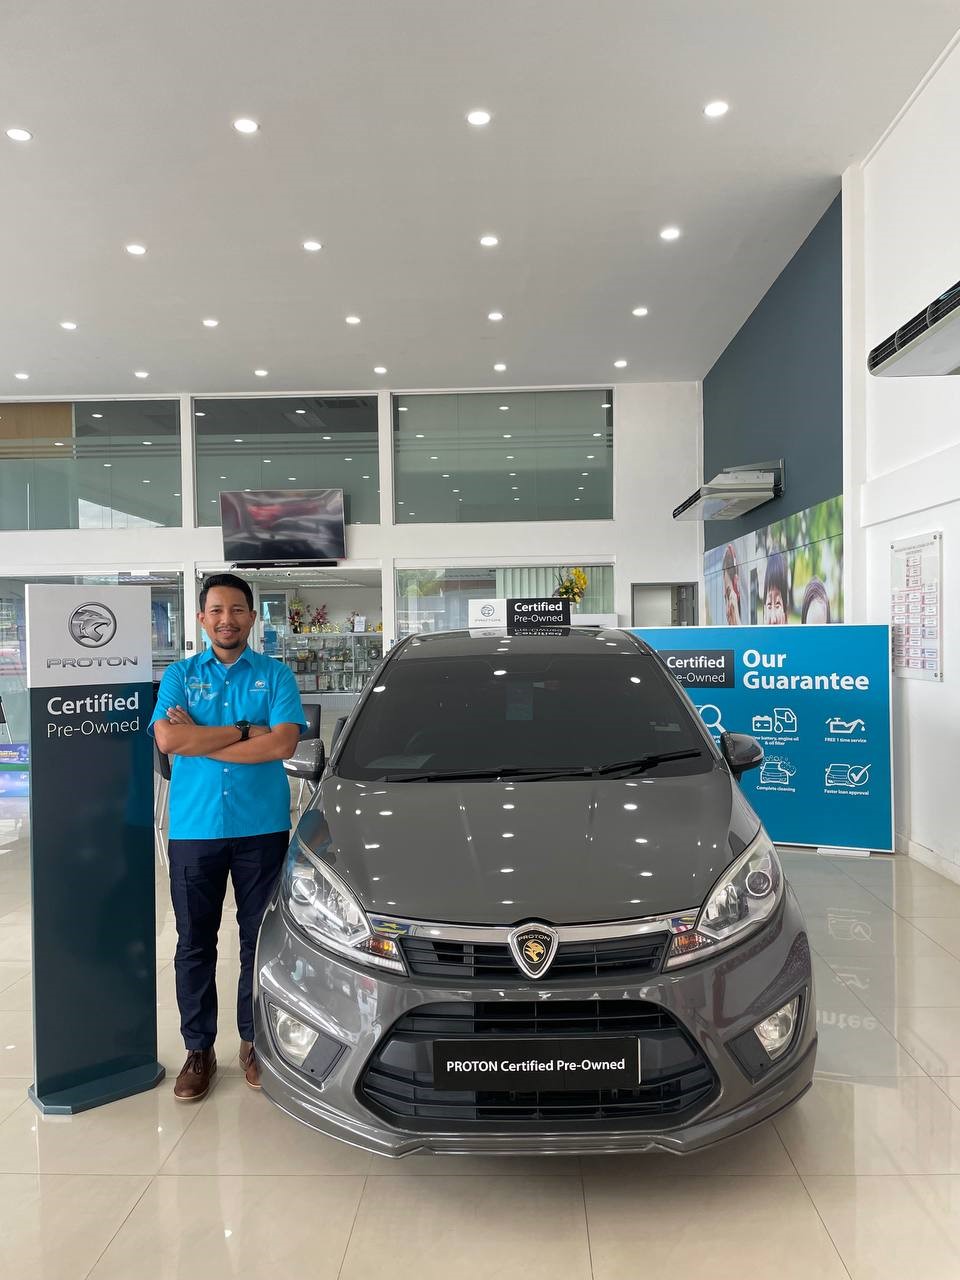 Funding Societies, Proton to provide financing to dealers